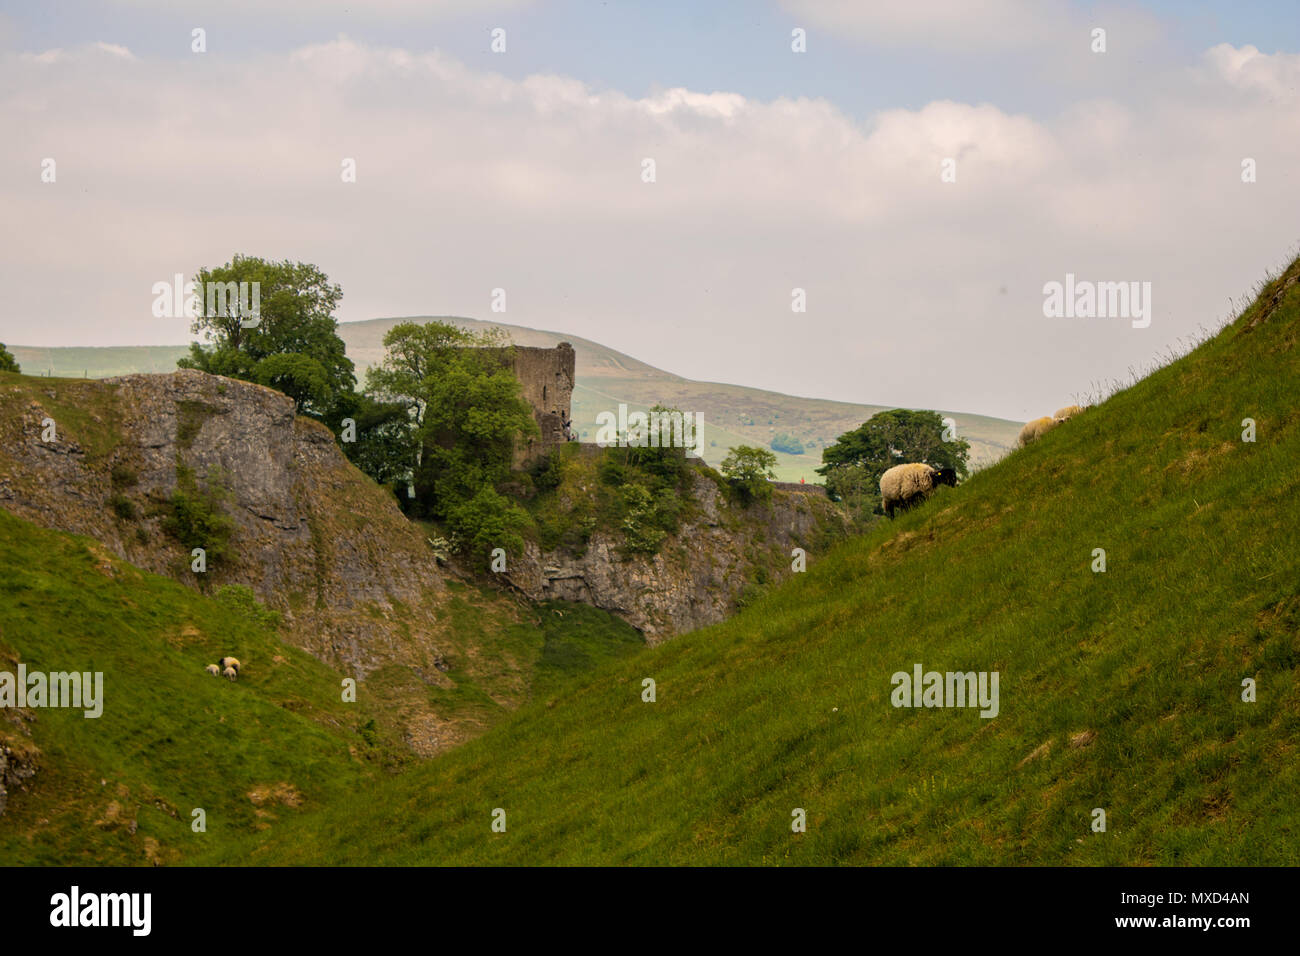 Sheep grazing in the valley beneath Peveril Castle near Castleton in the English Peak District Stock Photo